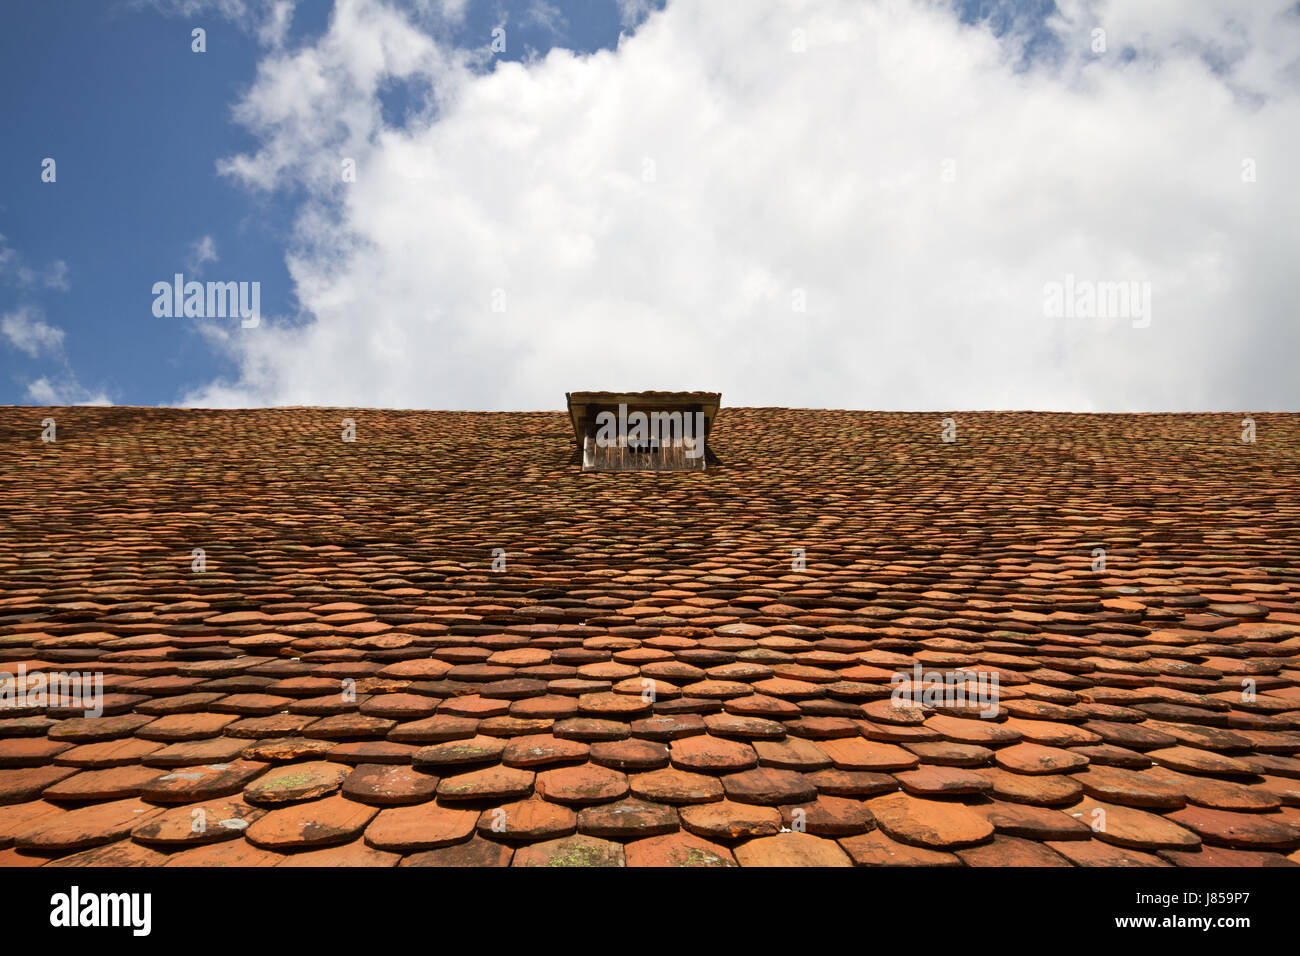 old tiled roof with skylight Stock Photo